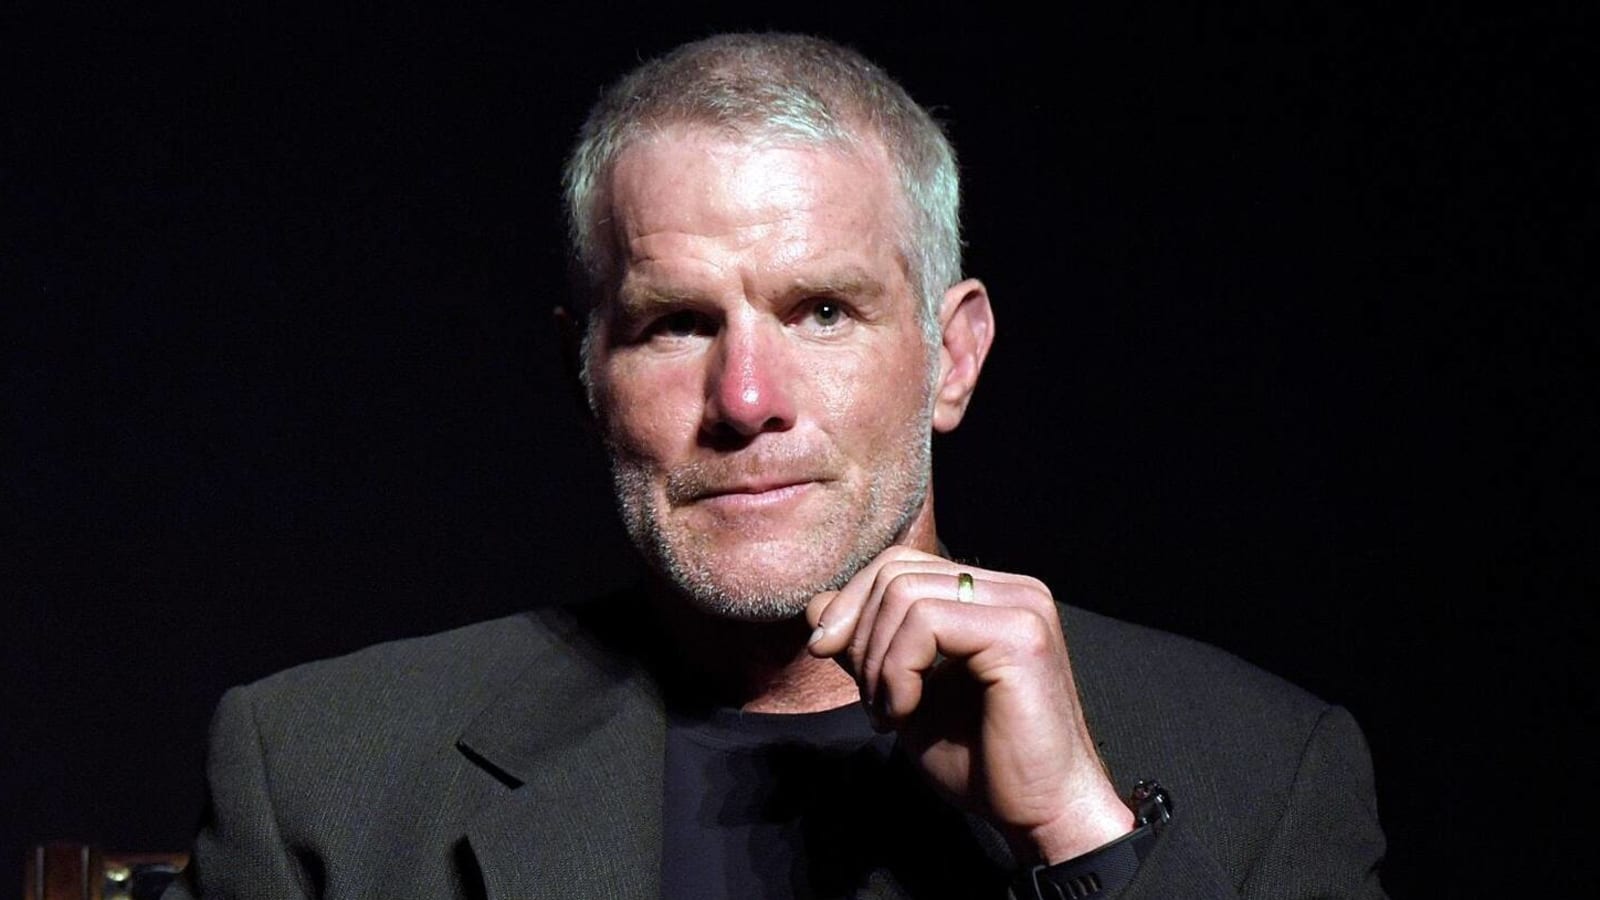 Texts allegedly show Brett Favre's role in welfare funds scandal